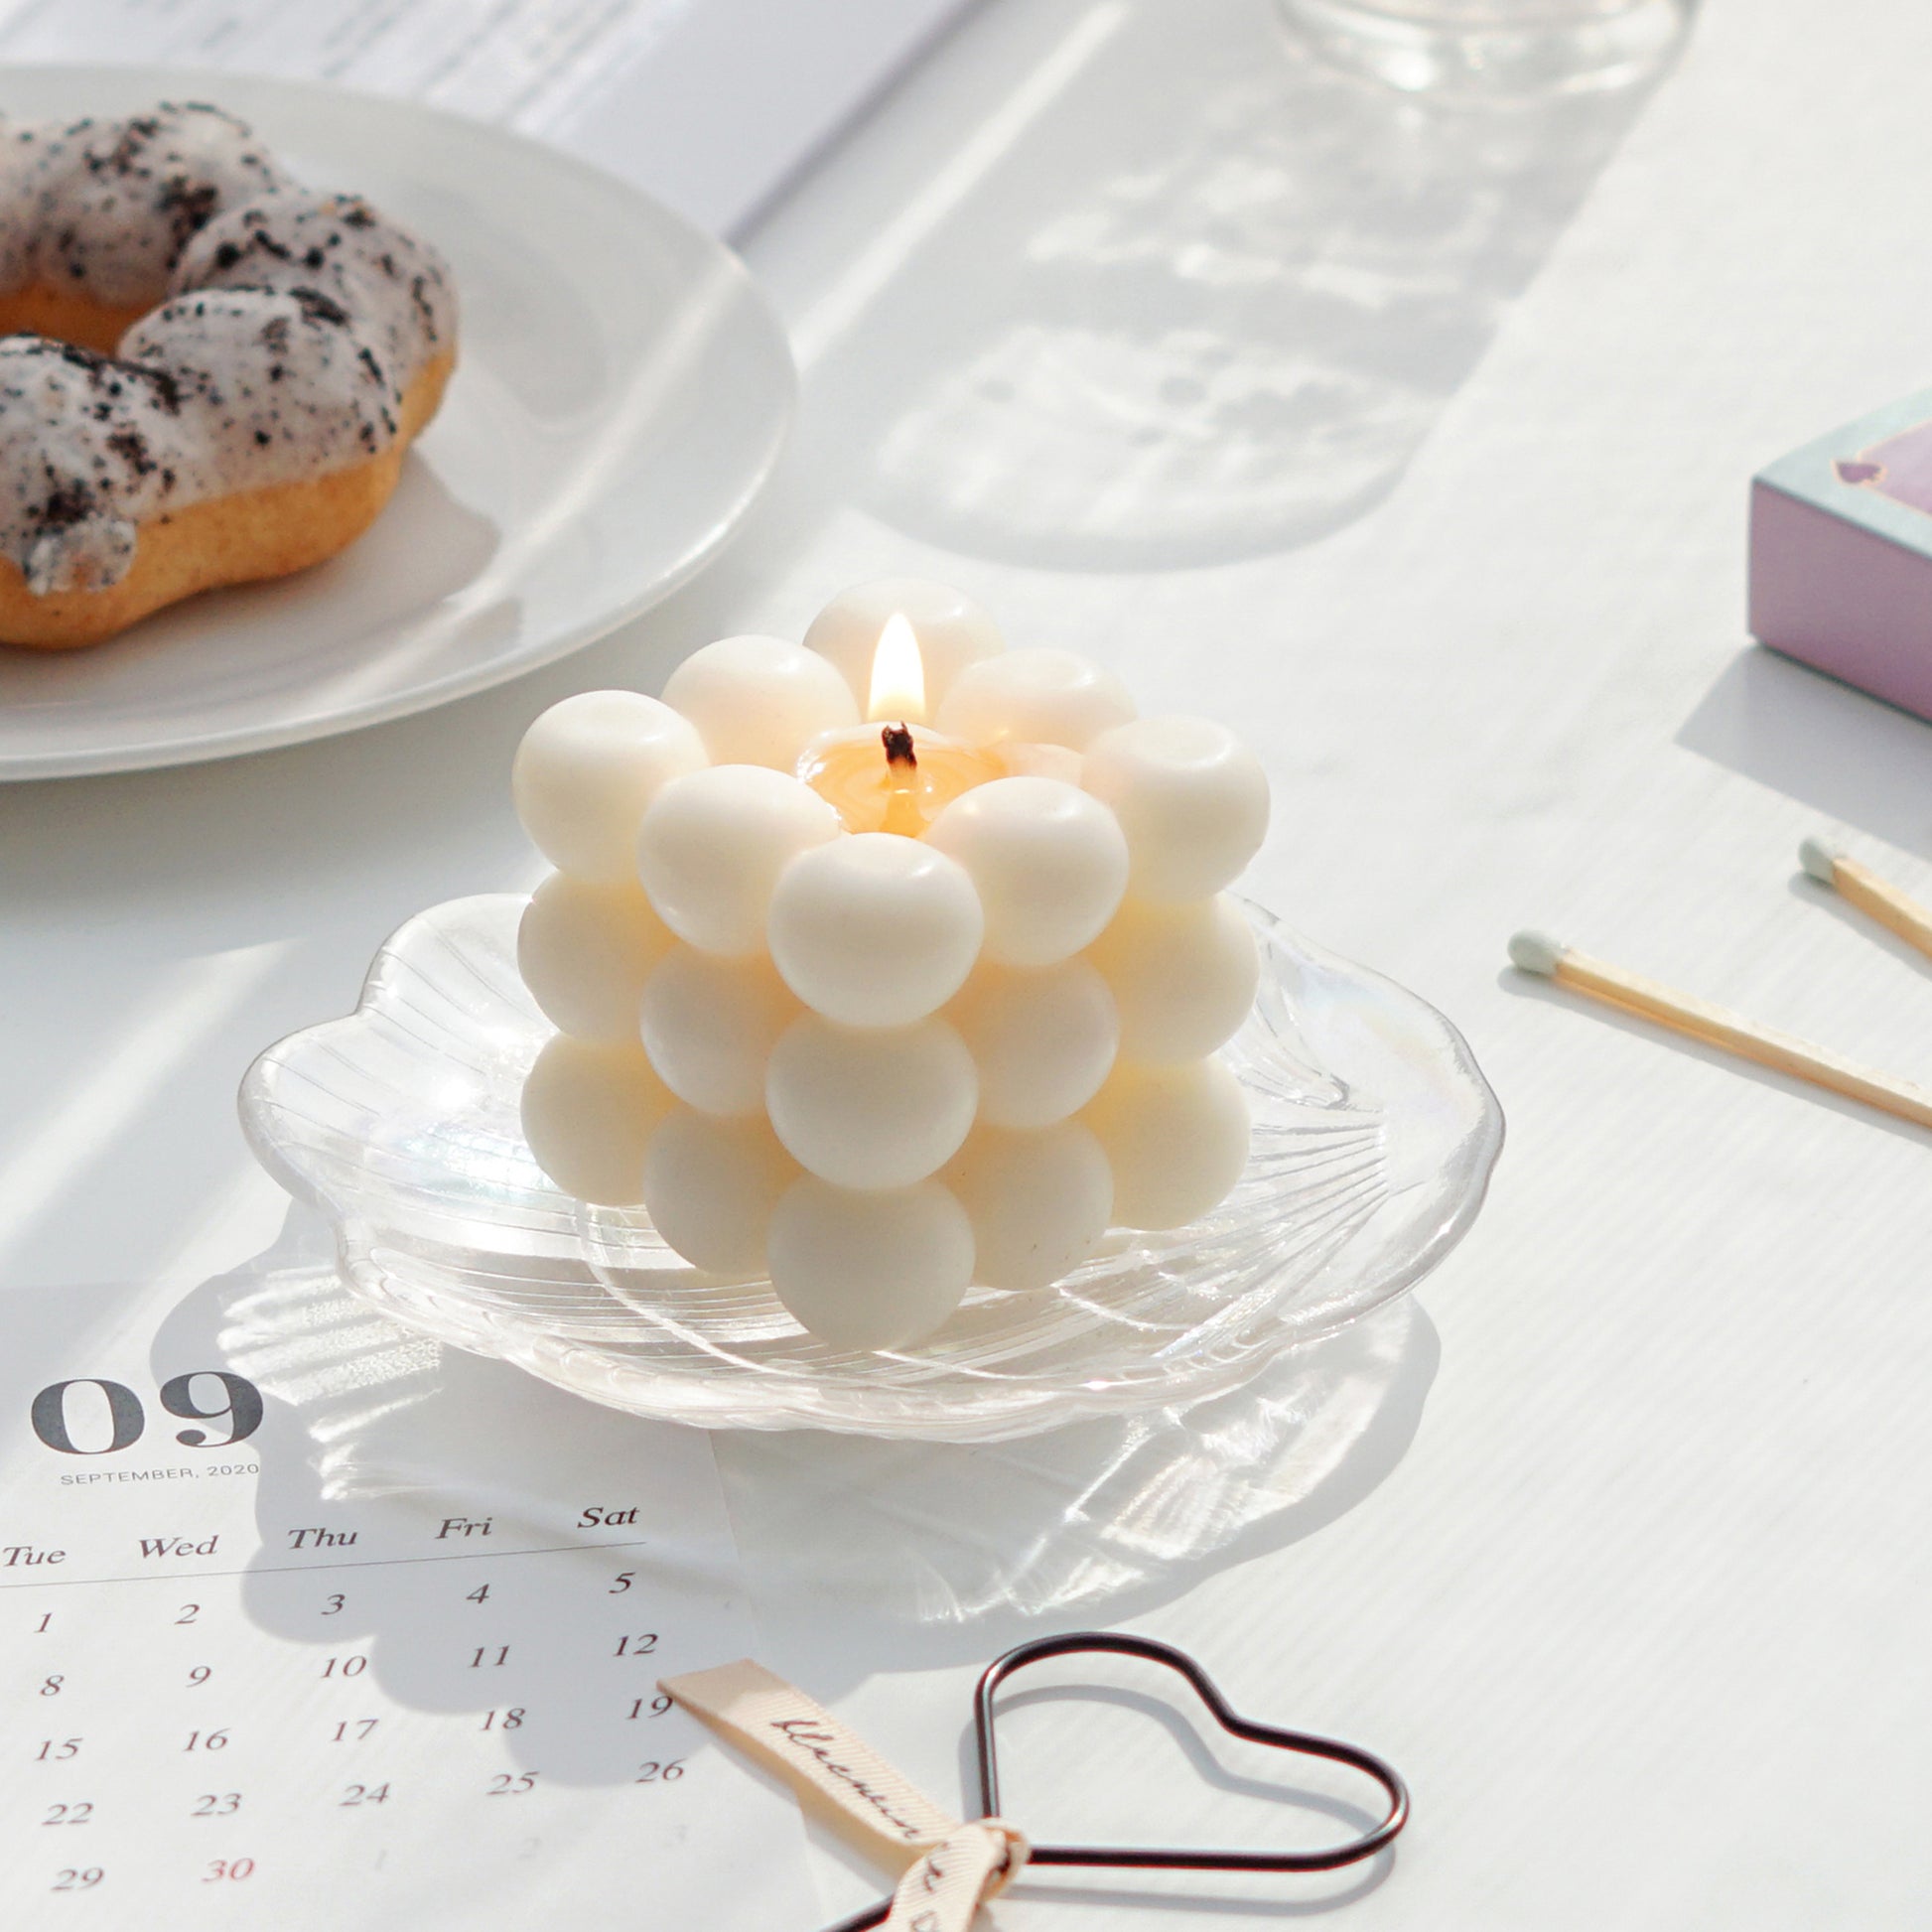 a lit white square cube bubble soy pillar candle on a holographic shell tray, september calendar postcard, heart wick dipper, mint color matches, and oreo cookie mochi donut on a white ceramic plate